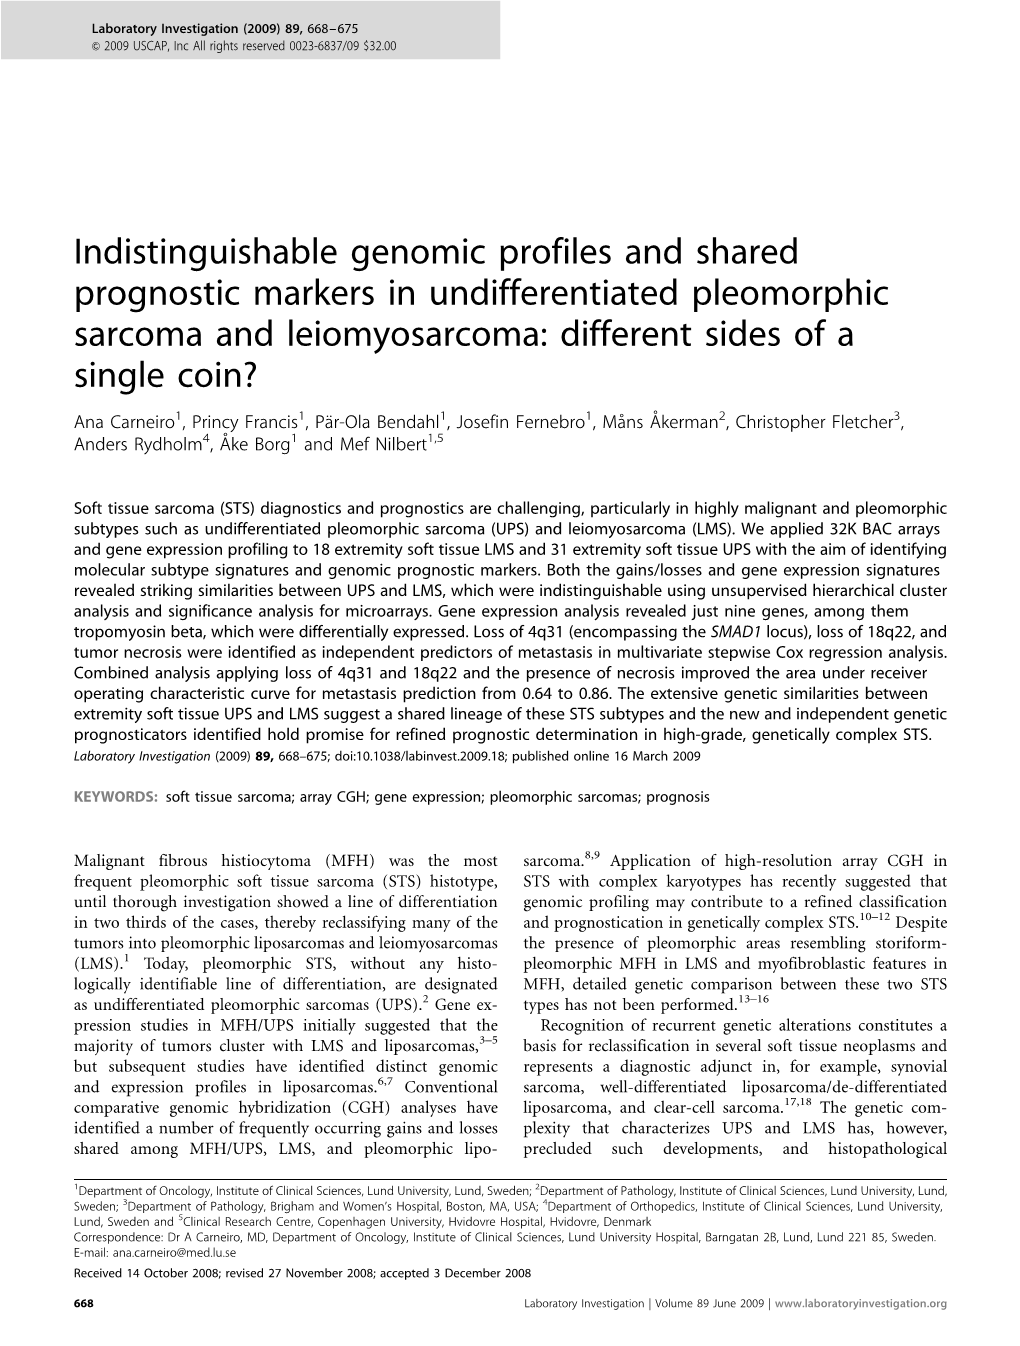 Indistinguishable Genomic Profiles and Shared Prognostic Markers In